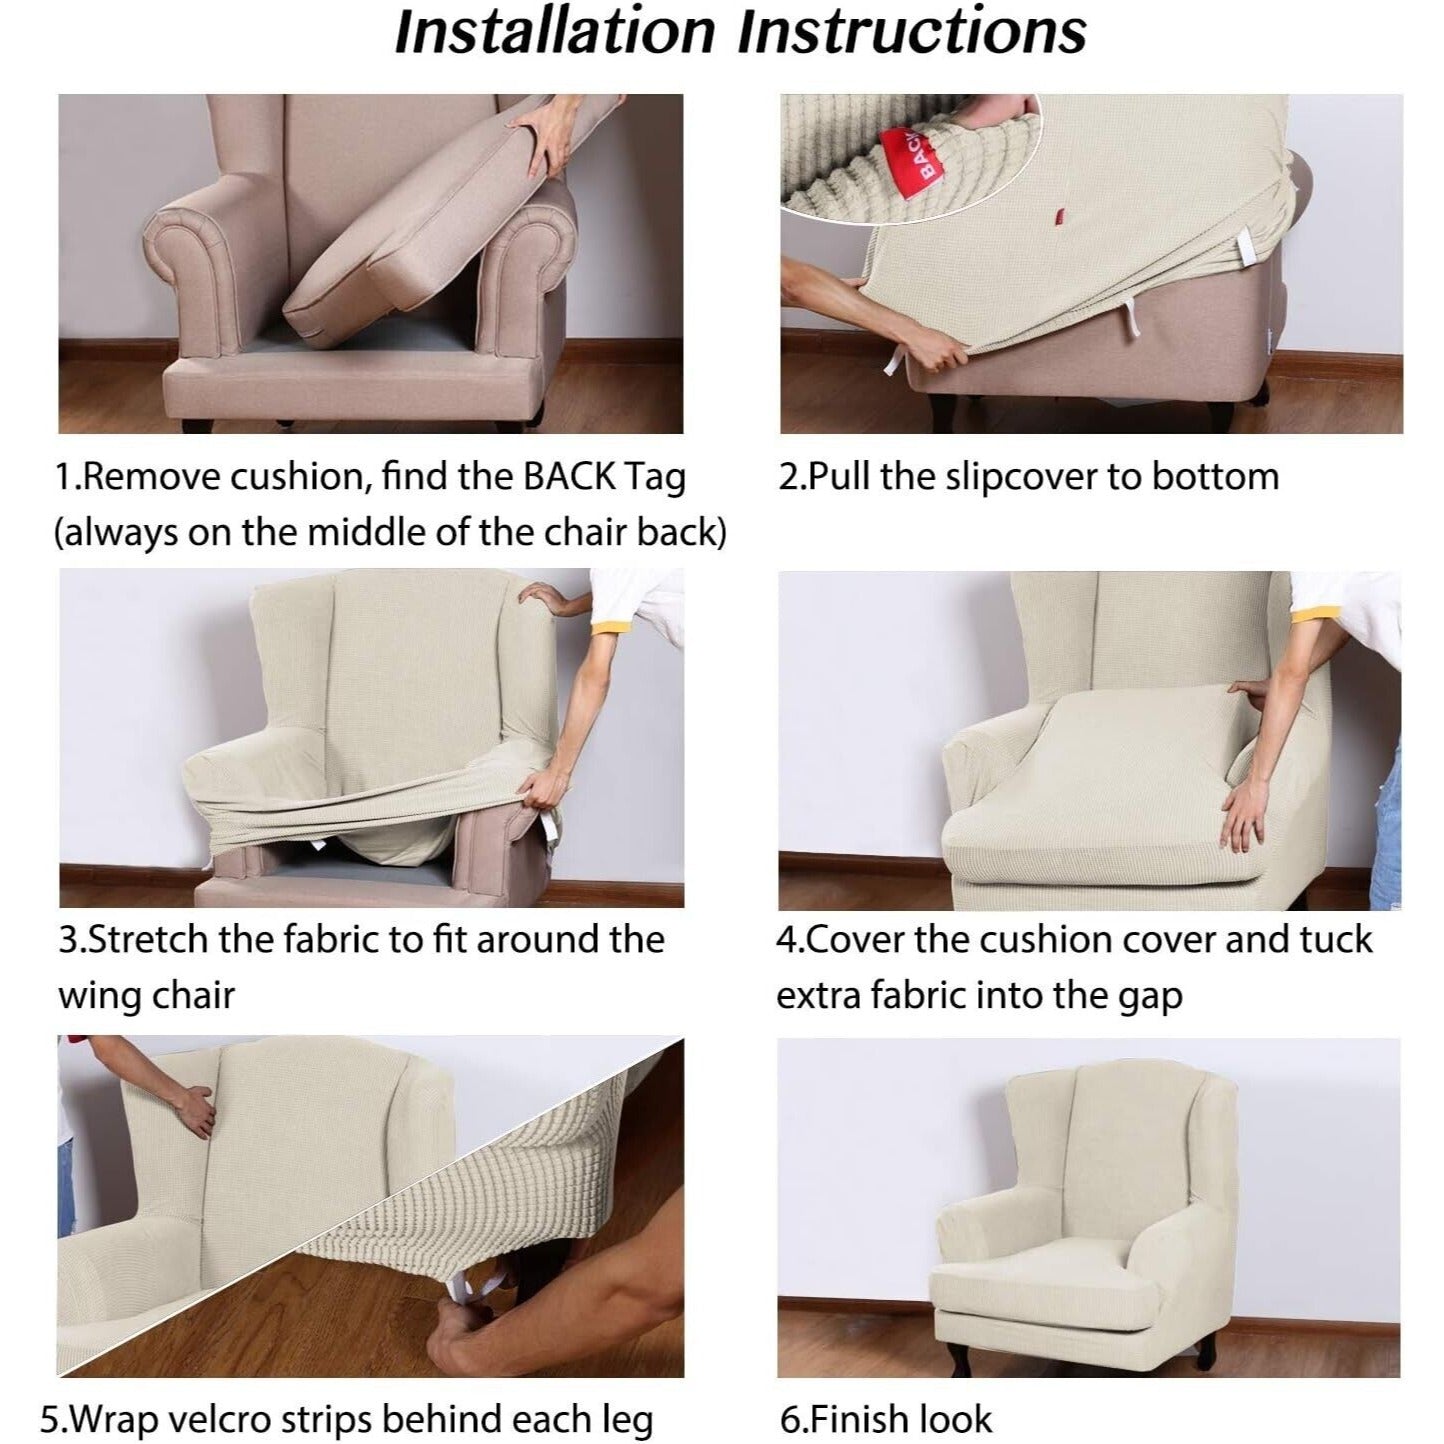 Turquoize Wingback Chair Covers 2 Piece Wing Chair Slipcover Stretch Beige